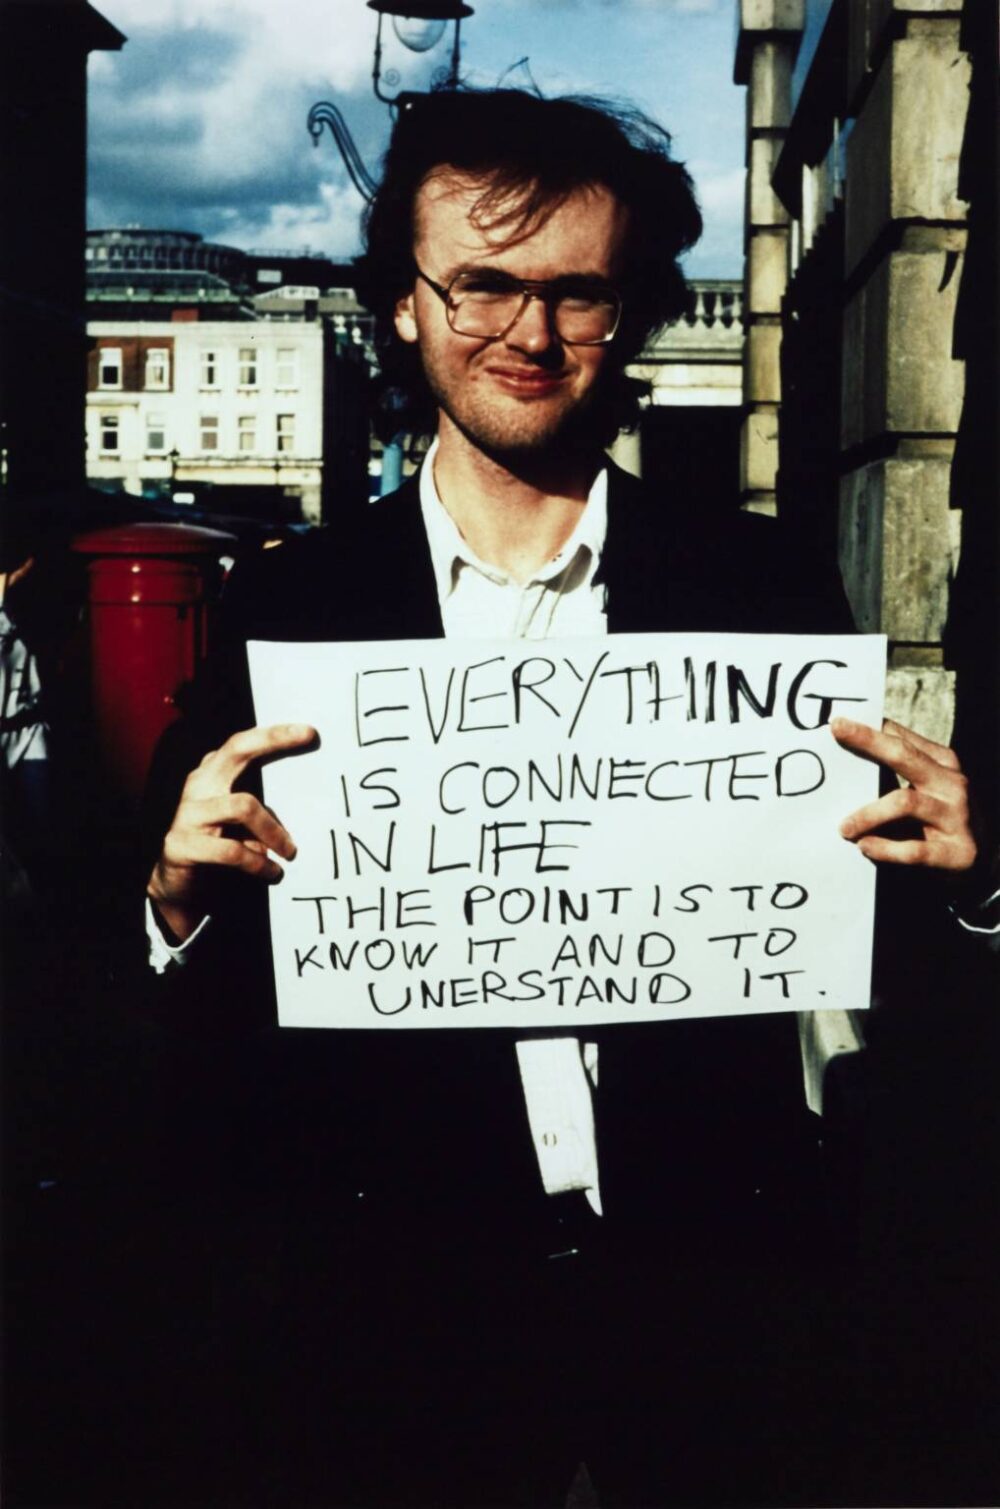 man holding up sign that reads "everything is connected in life. the point is to know it and to understand it."